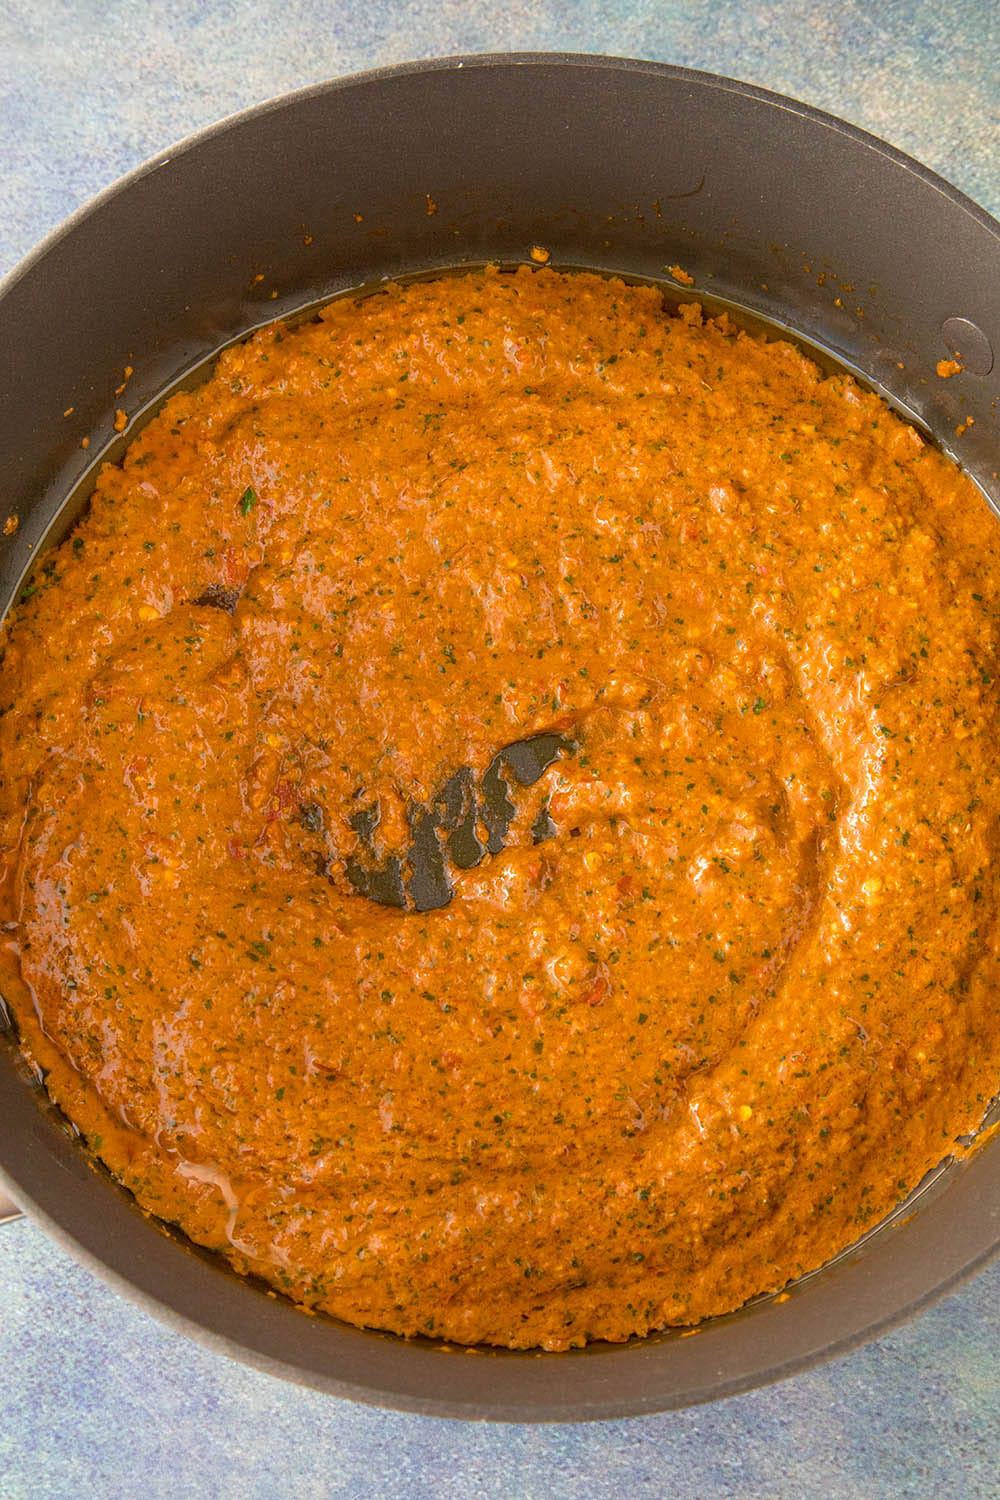 Cooking the curry paste first